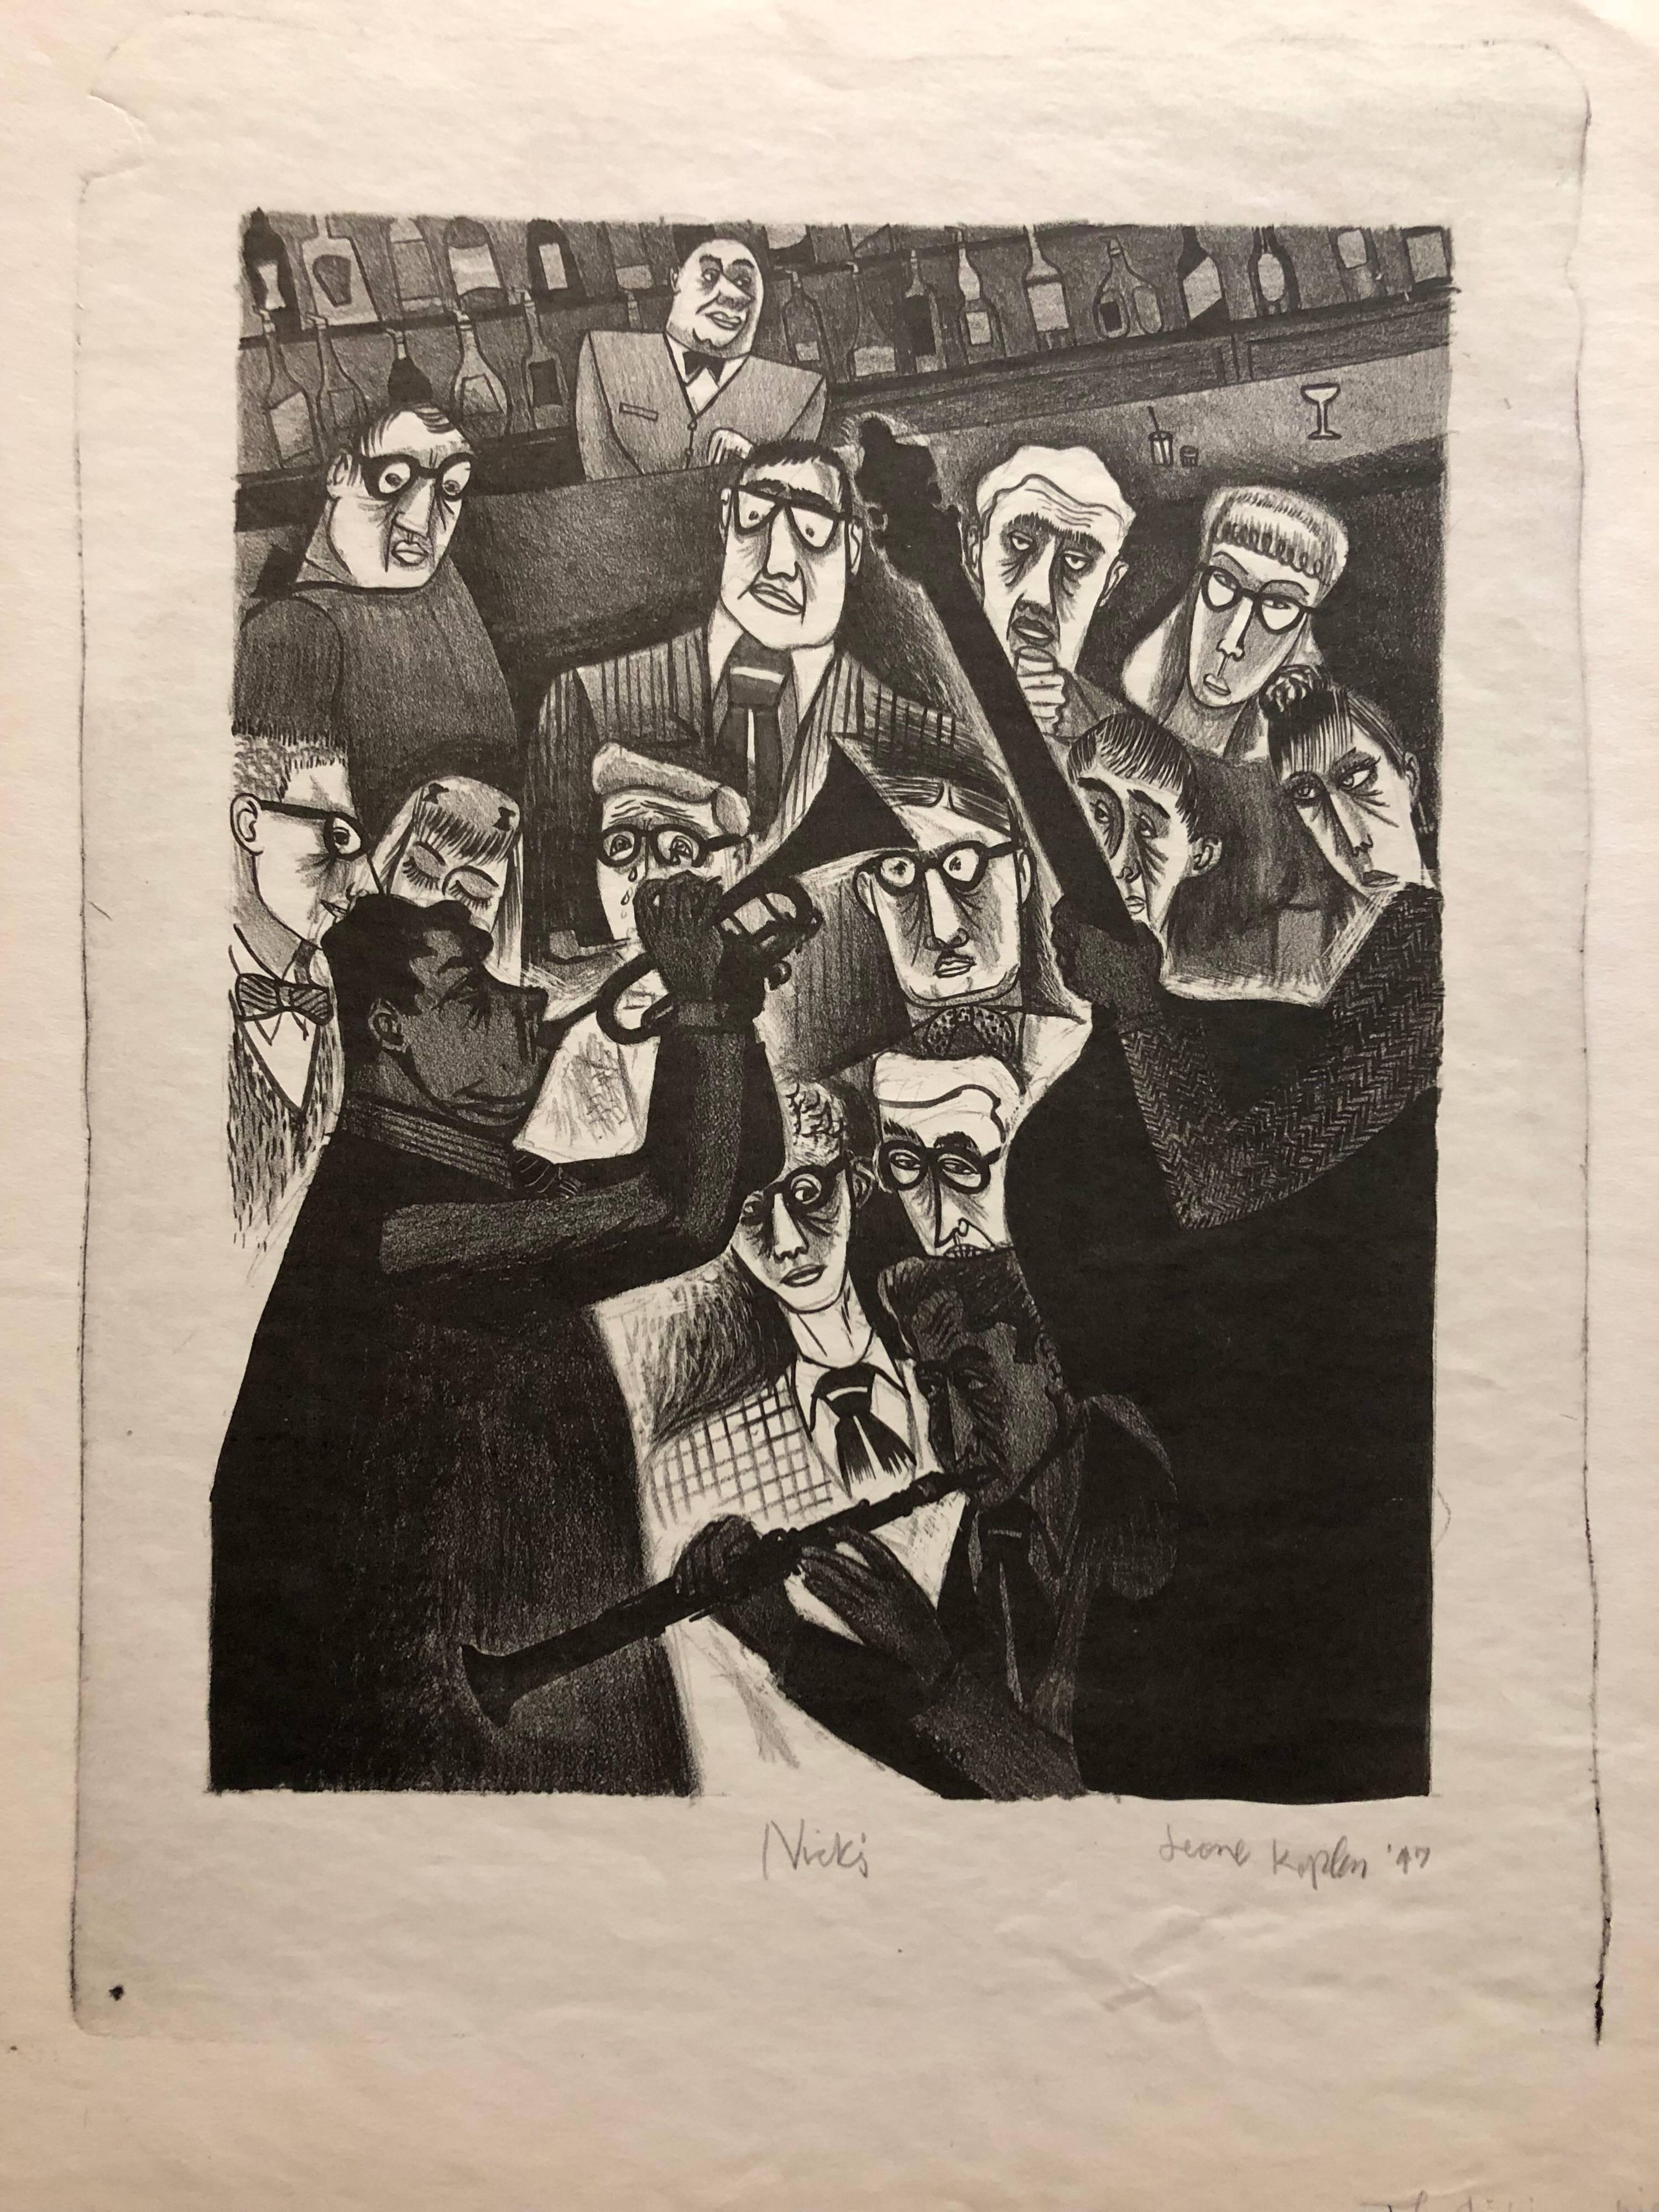 The Critic or Nick's 1947 Lithograph Jazz Band - Print by Jerome Kaplan